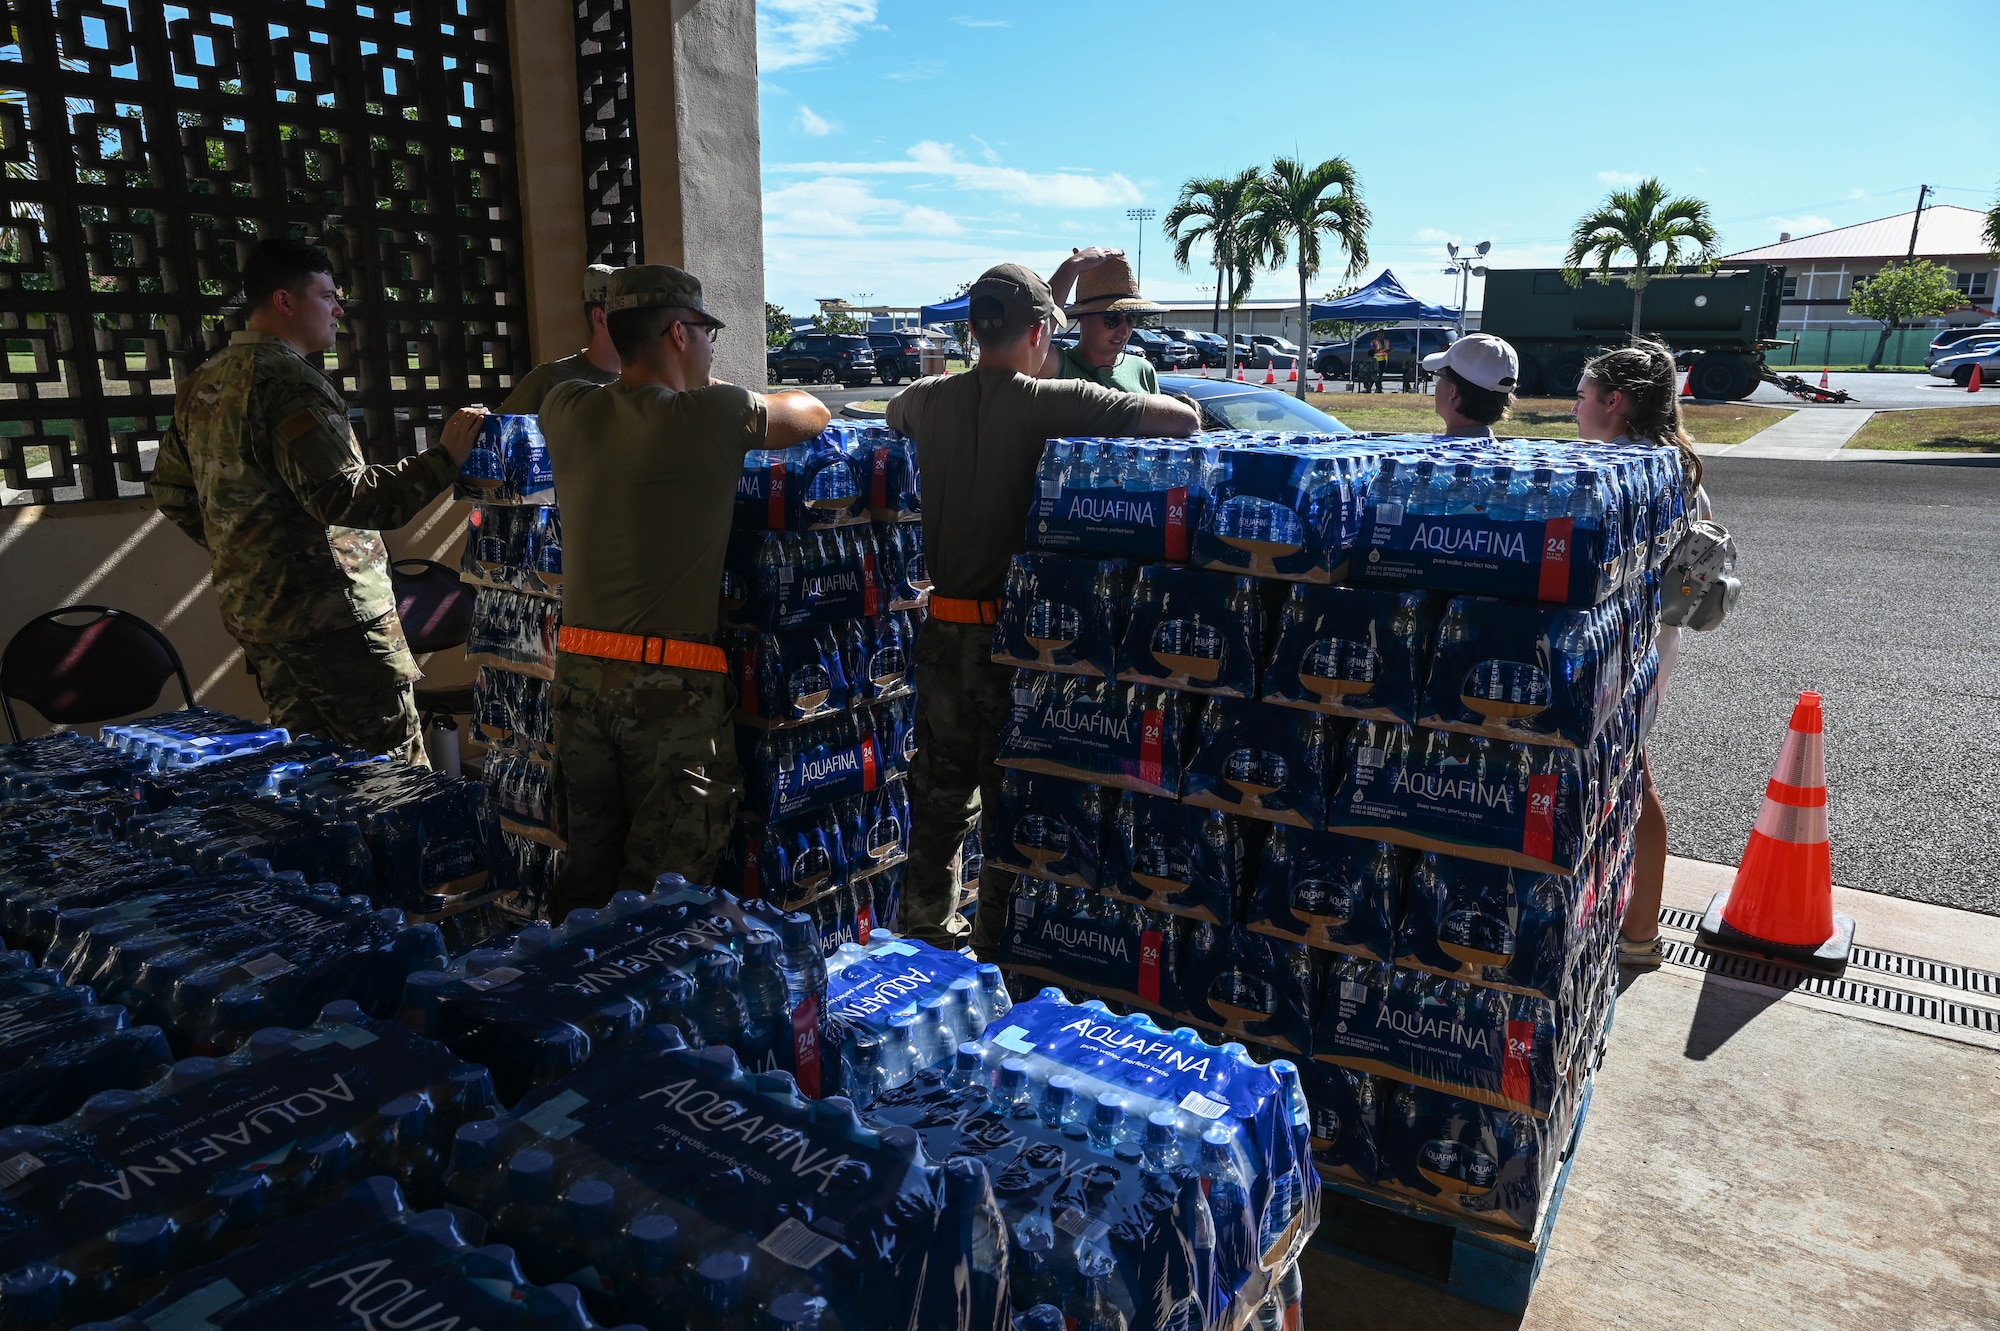 Airmen assigned to the 735th Air Mobility Squadron and 747th Cyberspace Squadron volunteer to distribute water to individuals in need at the Hickam Makai Recreation Center at Joint Base Pearl Harbor-Hickam, Hawaii, Dec. 2, 2021. The Chief’s Group, First Sergeants, dormitory Airmen and First Term Airmen Center Airmen helped compile the volunteers who distributed the bottled water. (U.S. Air Force Staff Sgt. Alan Ricker)